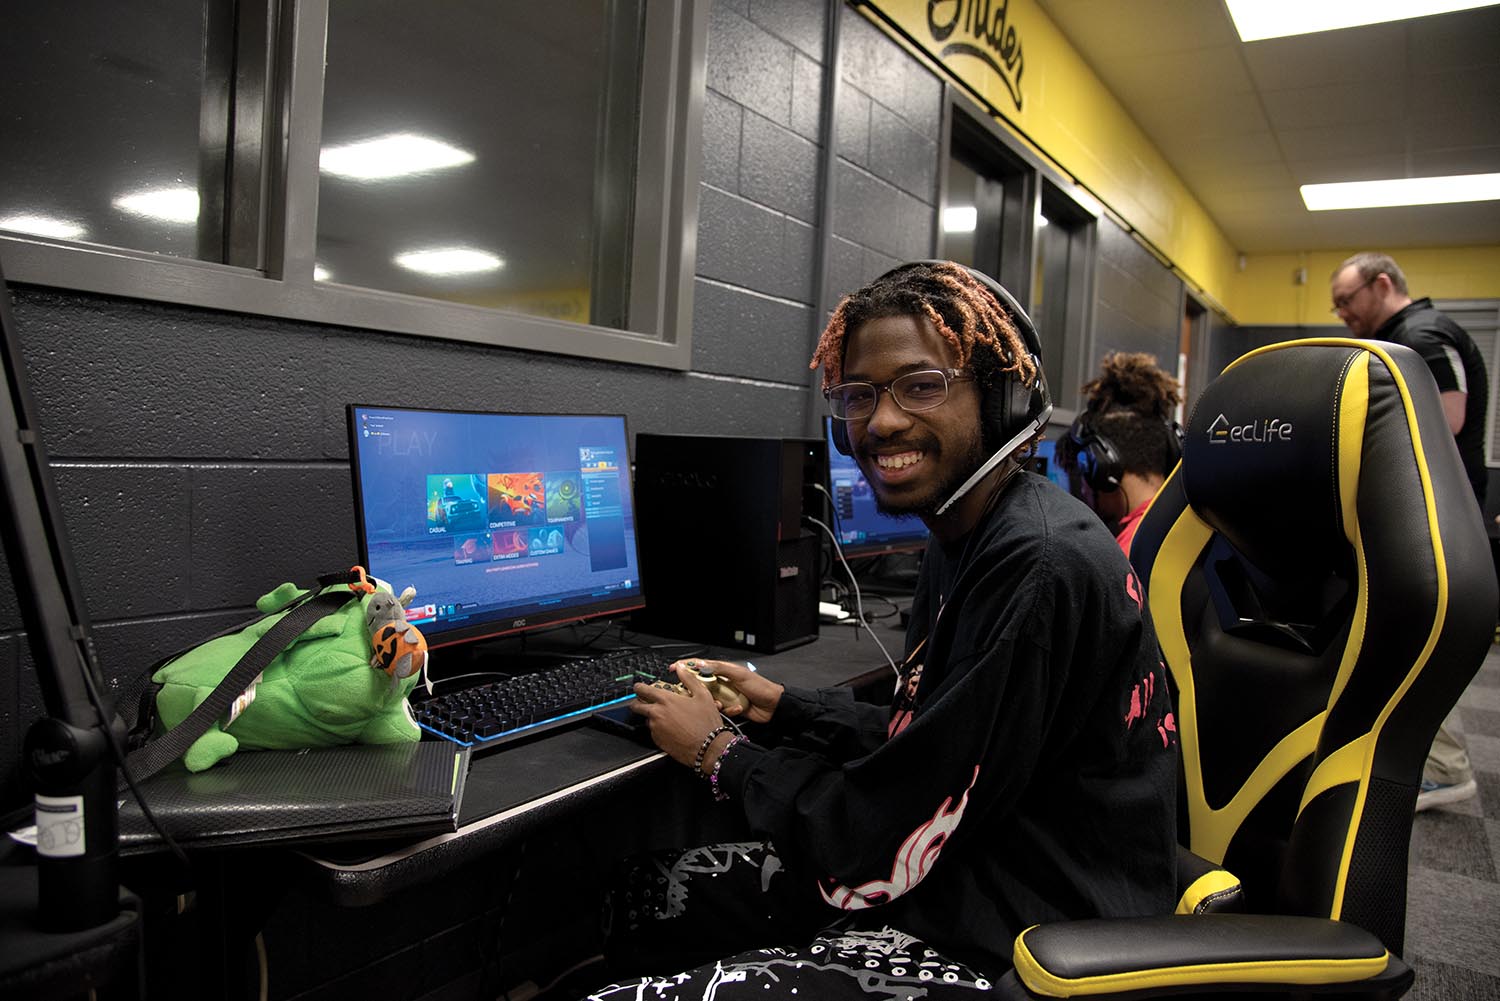 Esports: A real game changer - Indiana Connection